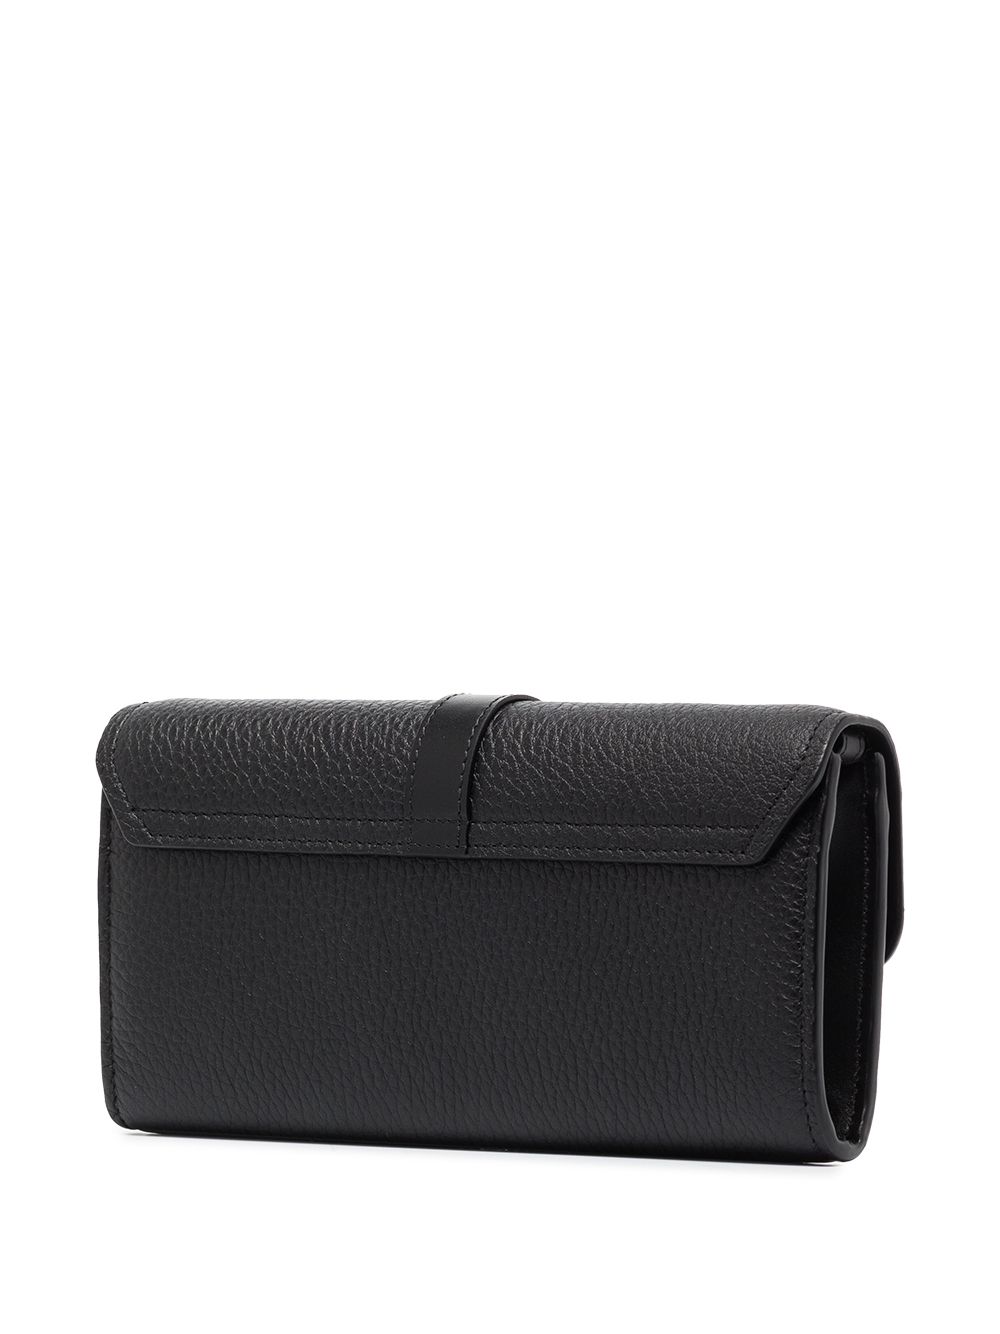 Chloé Aby Wallet On Chain - Farfetch